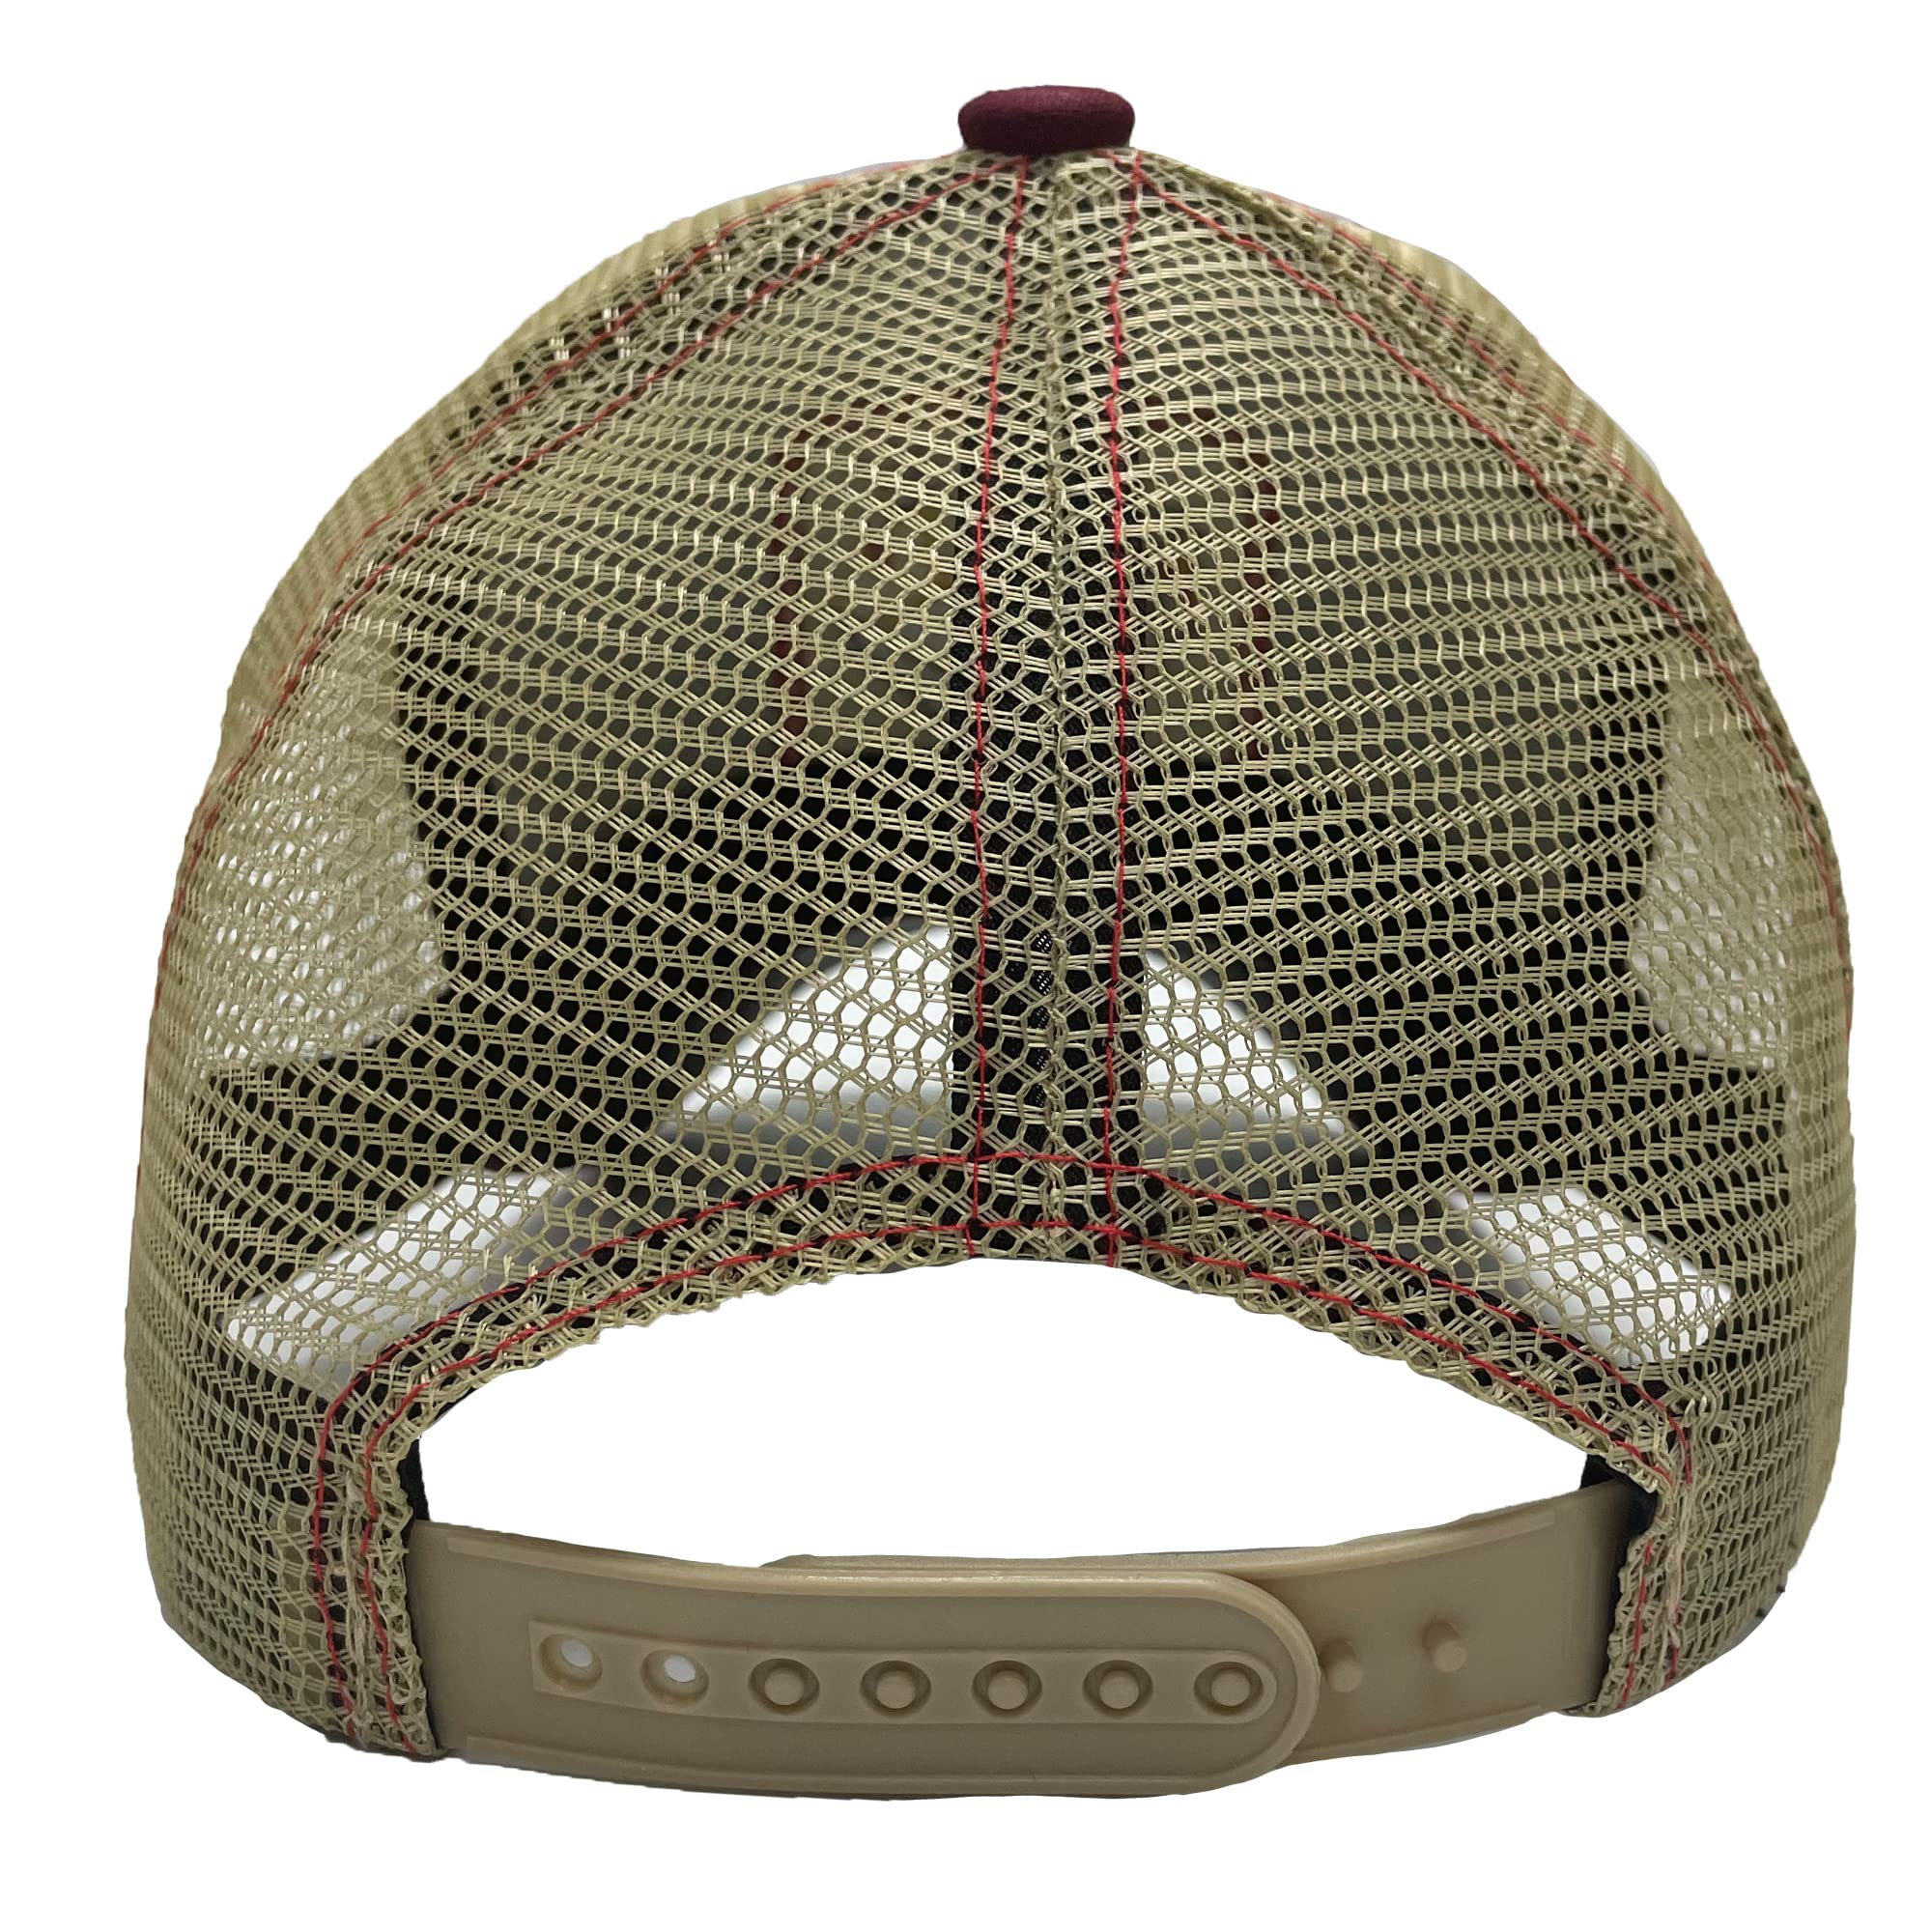 Mesh Trucker Hat Snapback Square Patch Baseball Caps - Rooster